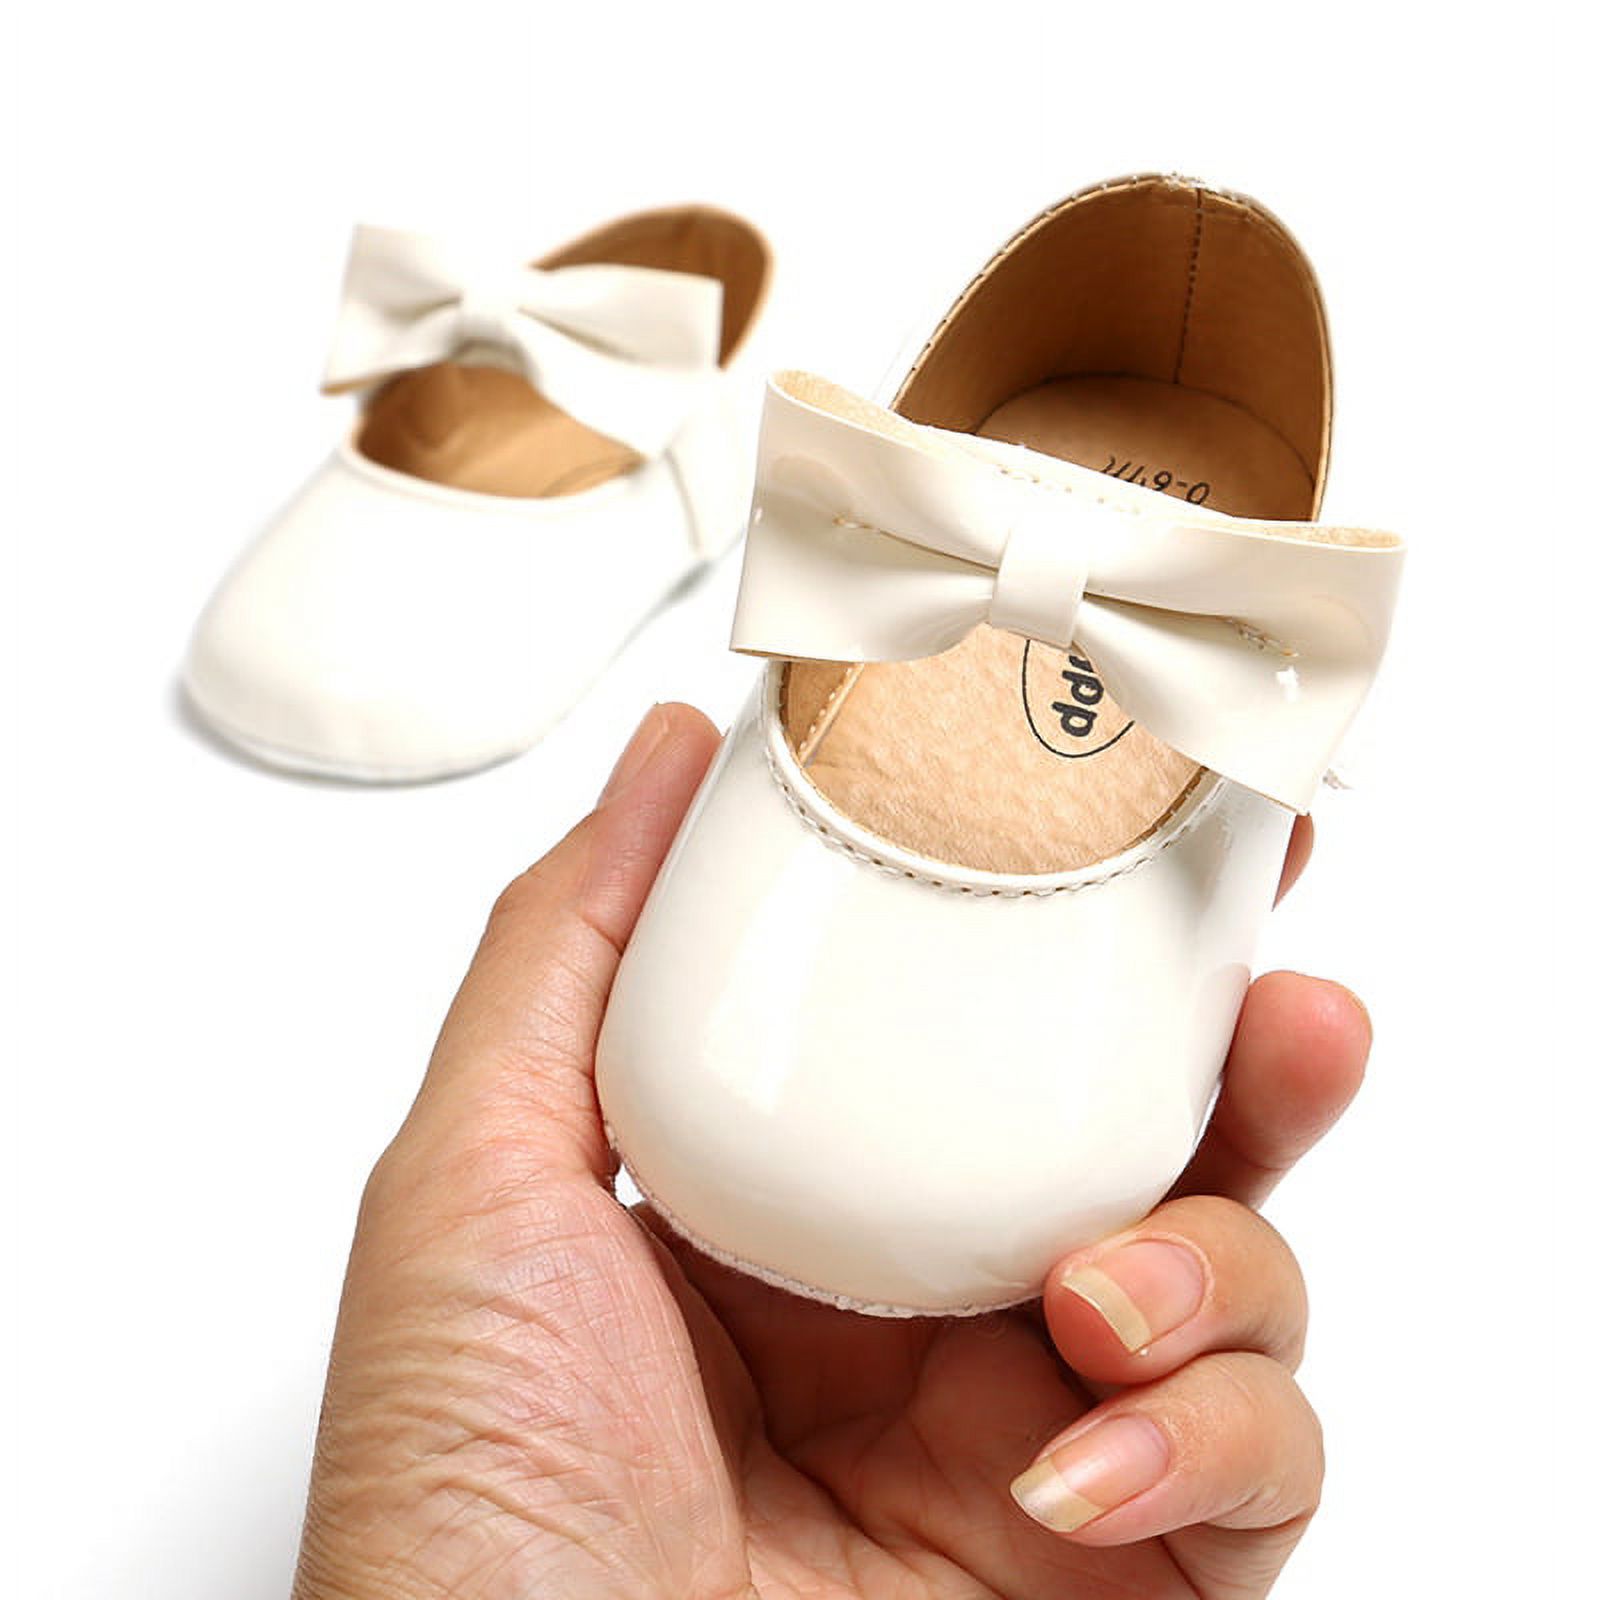 Infant Toddler Baby Girl's Soft Sole Anti-Slip Casual Shoes PU Leather Bowknot Princess Shoes - image 5 of 7